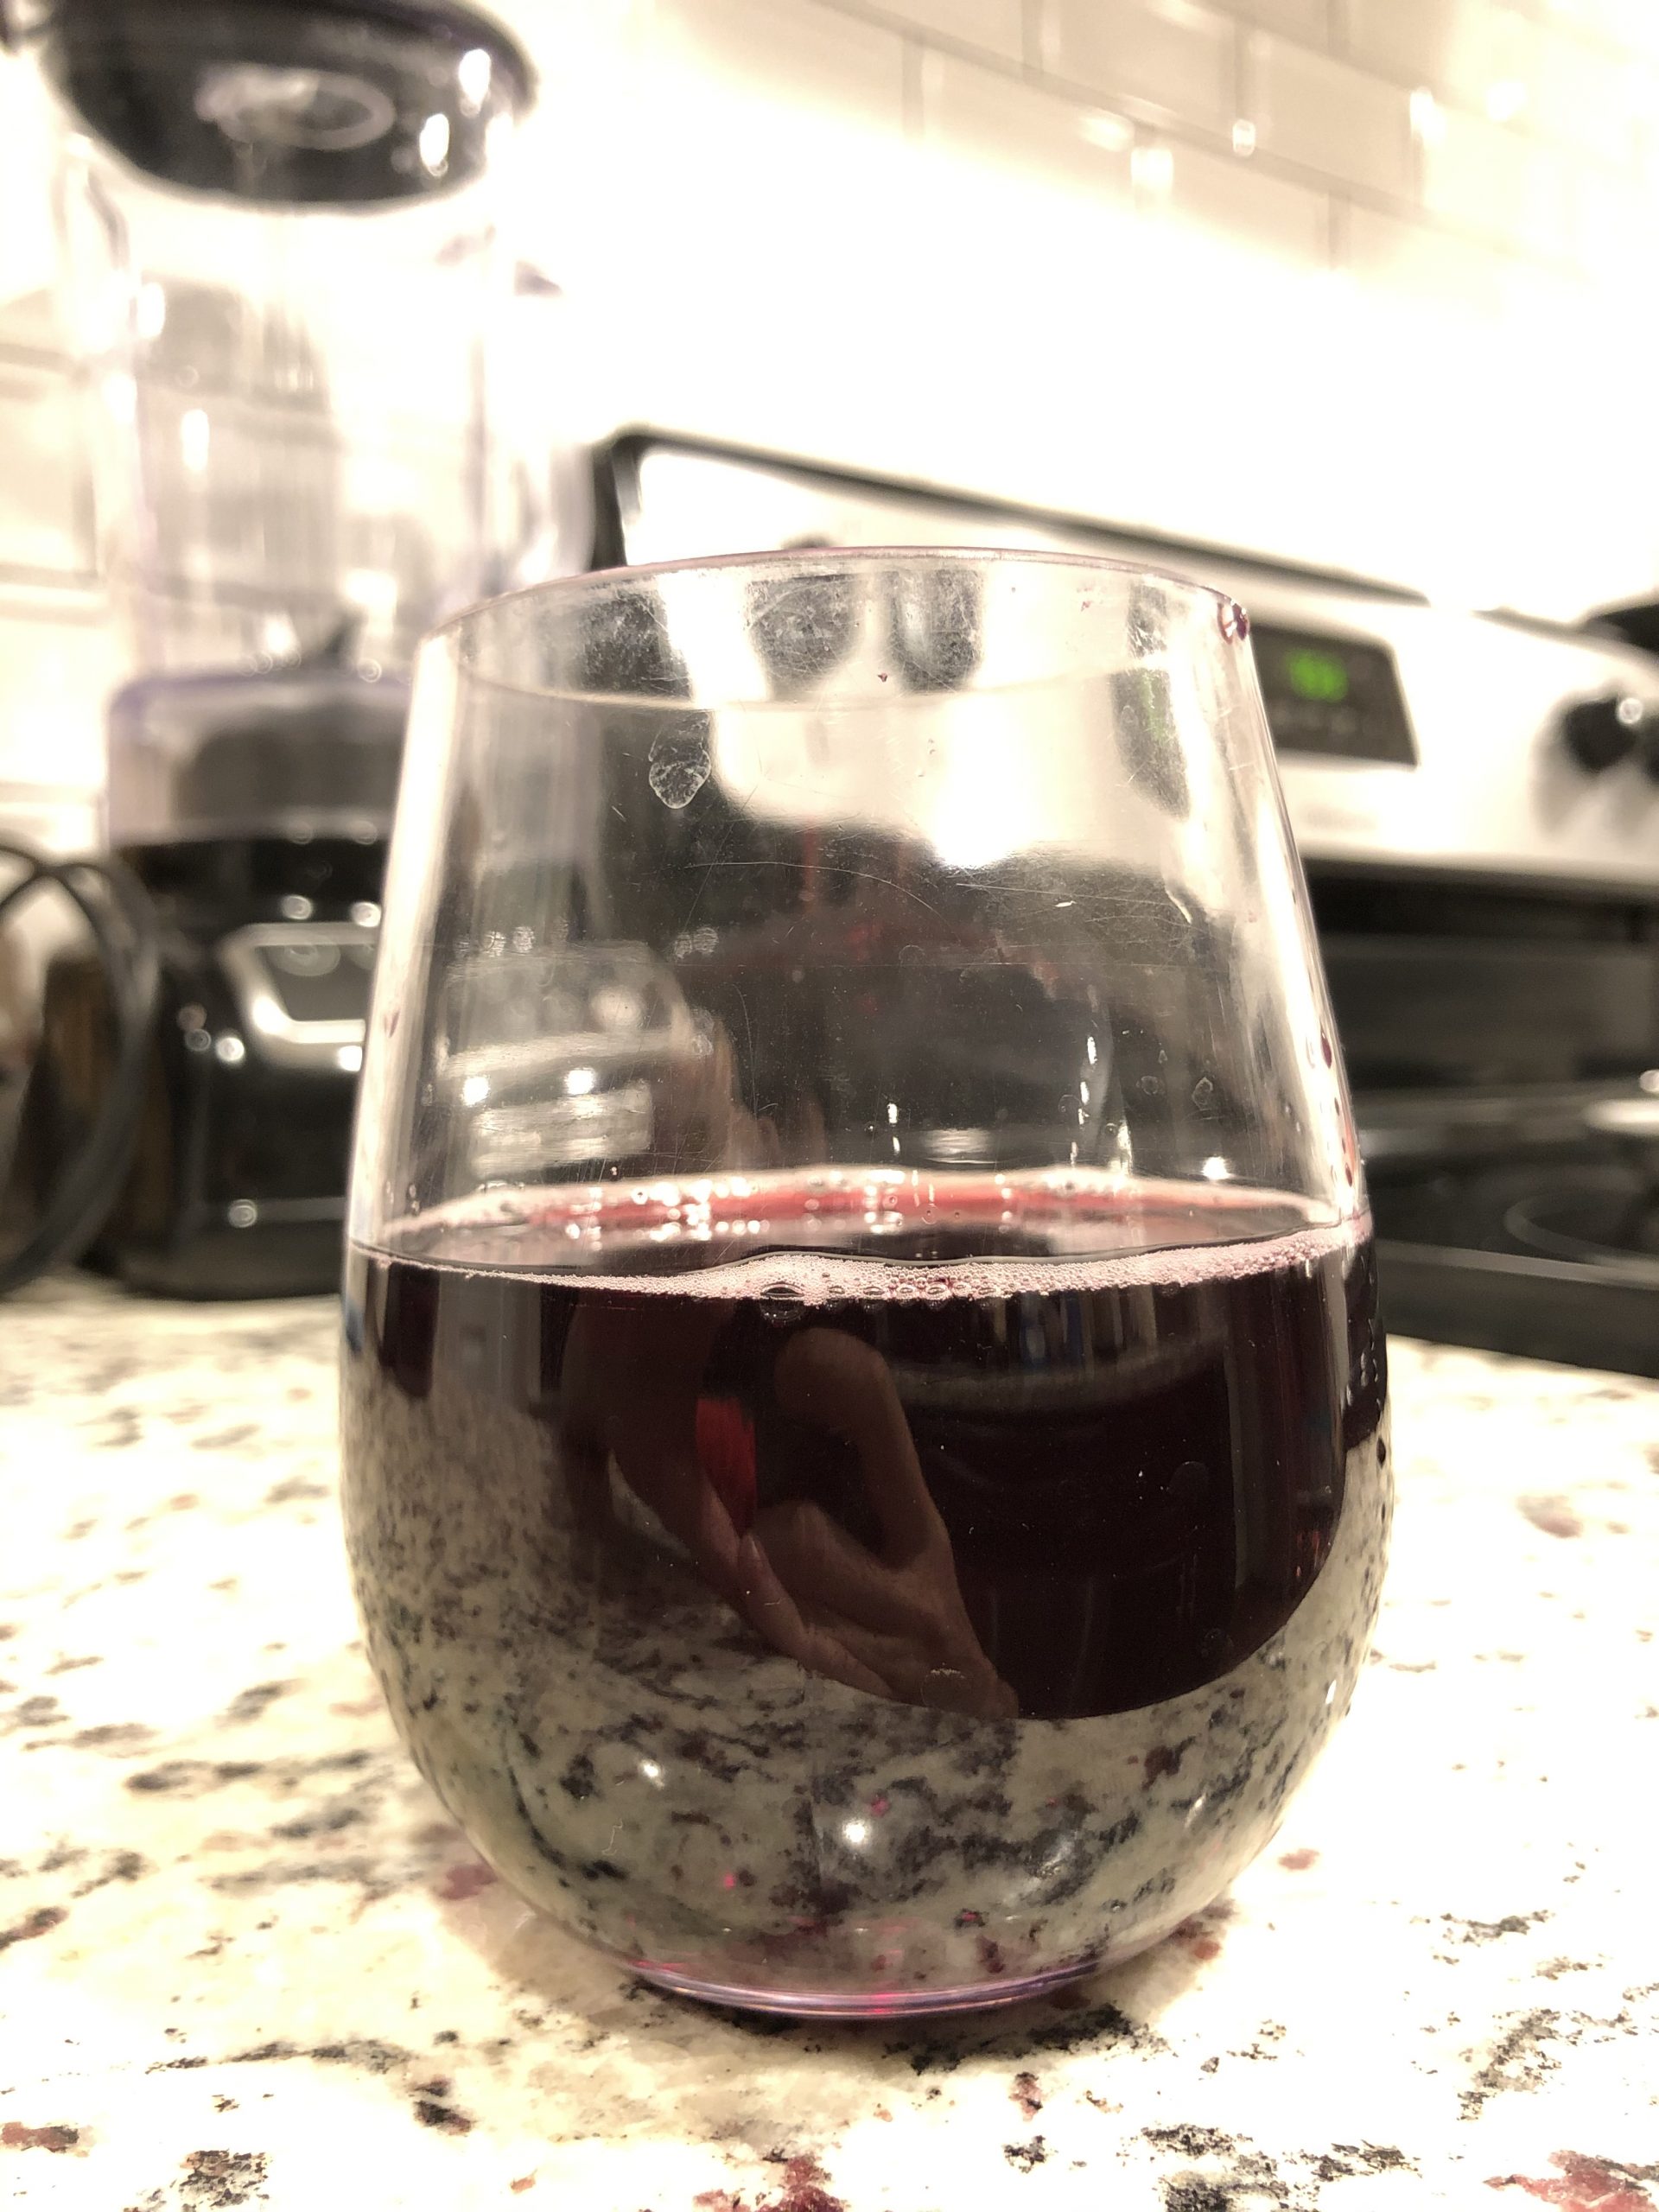 https://ibuytoomuch.com/wp-content/uploads/2020/04/Unbreakable-Stemless-Wine-Glass-by-Bravario-scaled.jpg